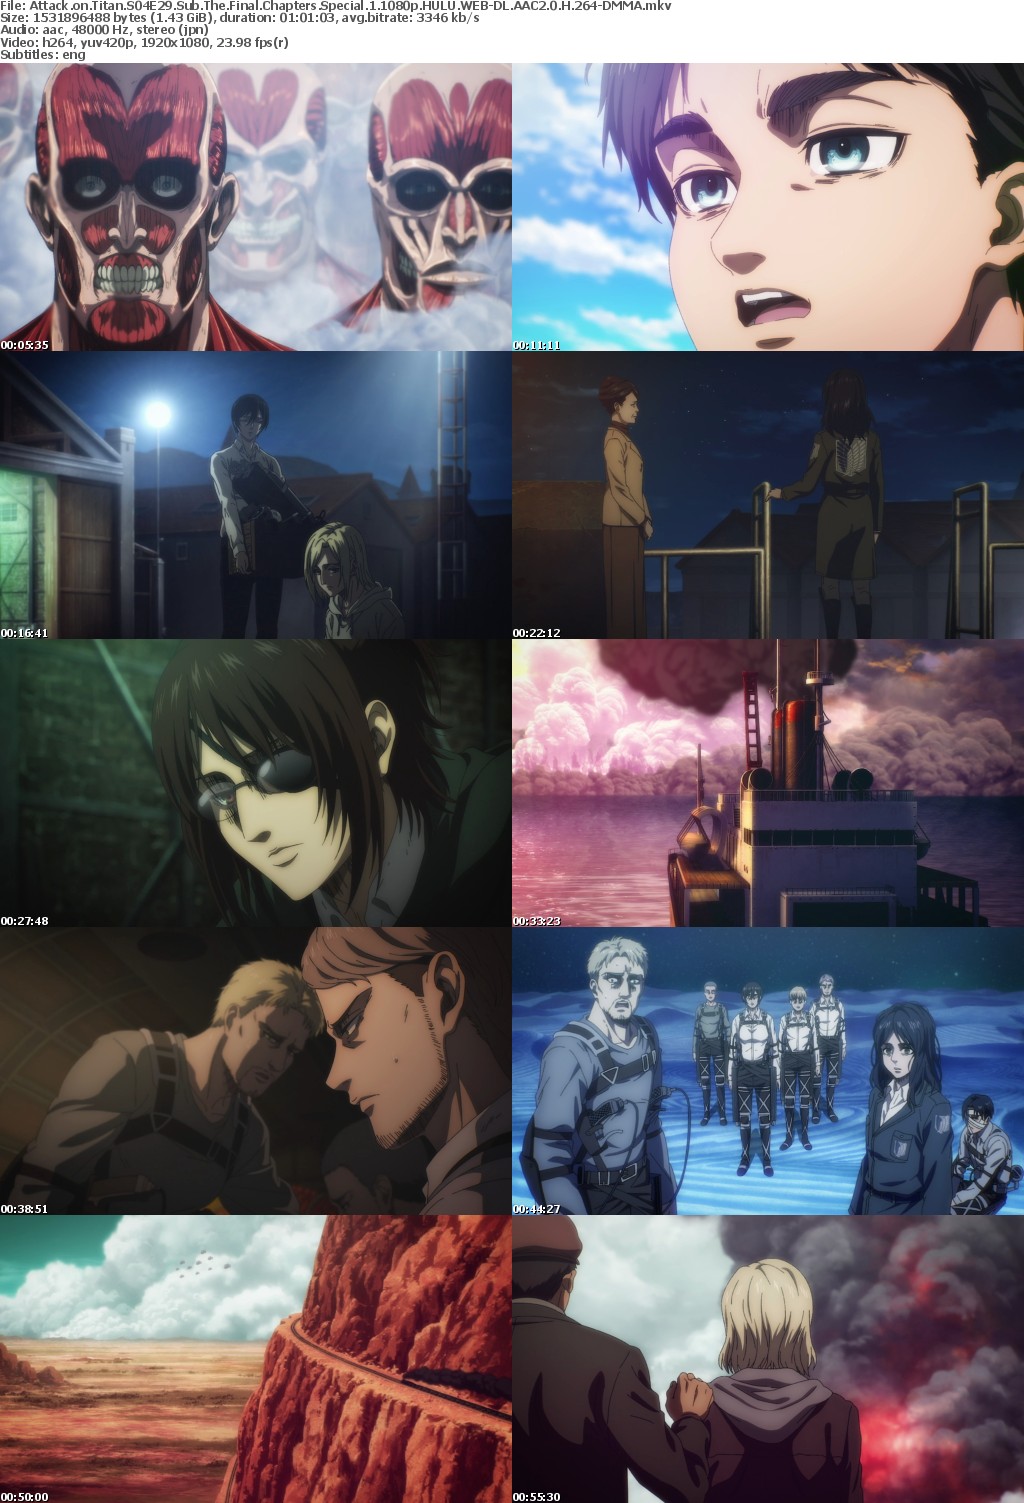 Attack on Titan S04E29 Sub The Final Chapters Special 1 1080p HULU WEB-DL AAC2 0 H 264-DMMA